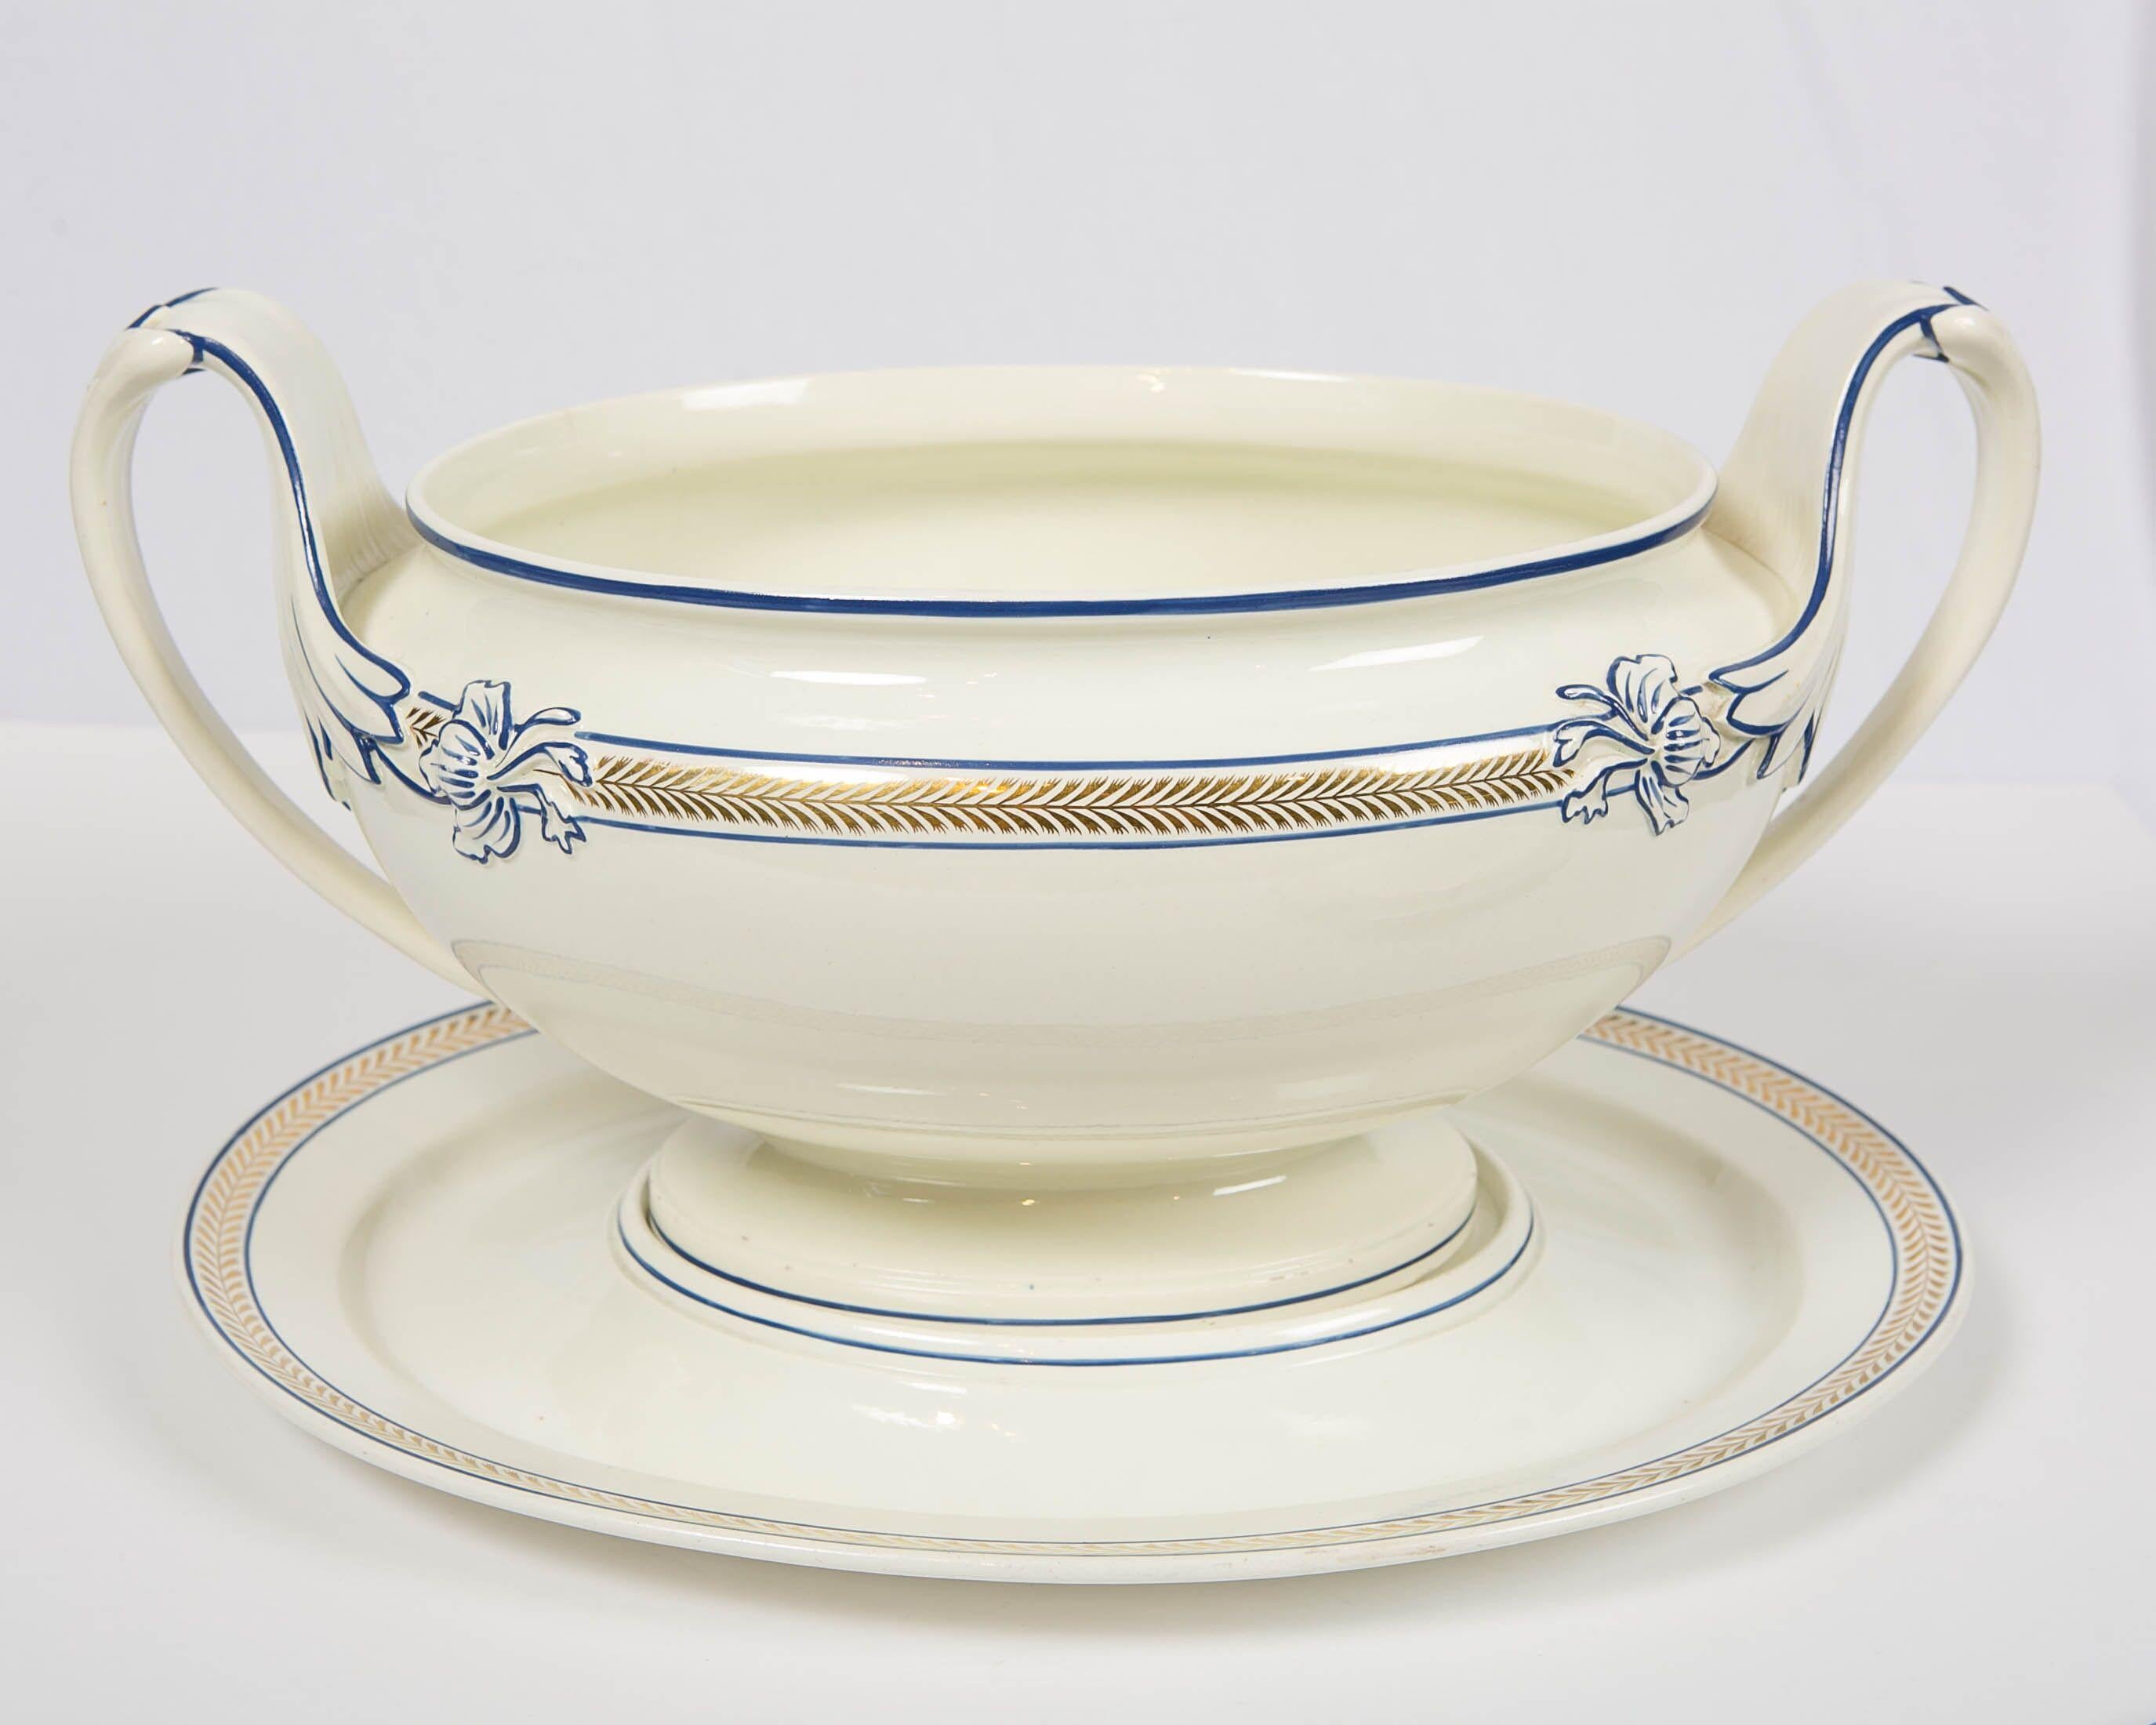 Neoclassical Large Wedgwood Creamware Soup Tureen Made in England, circa 1820